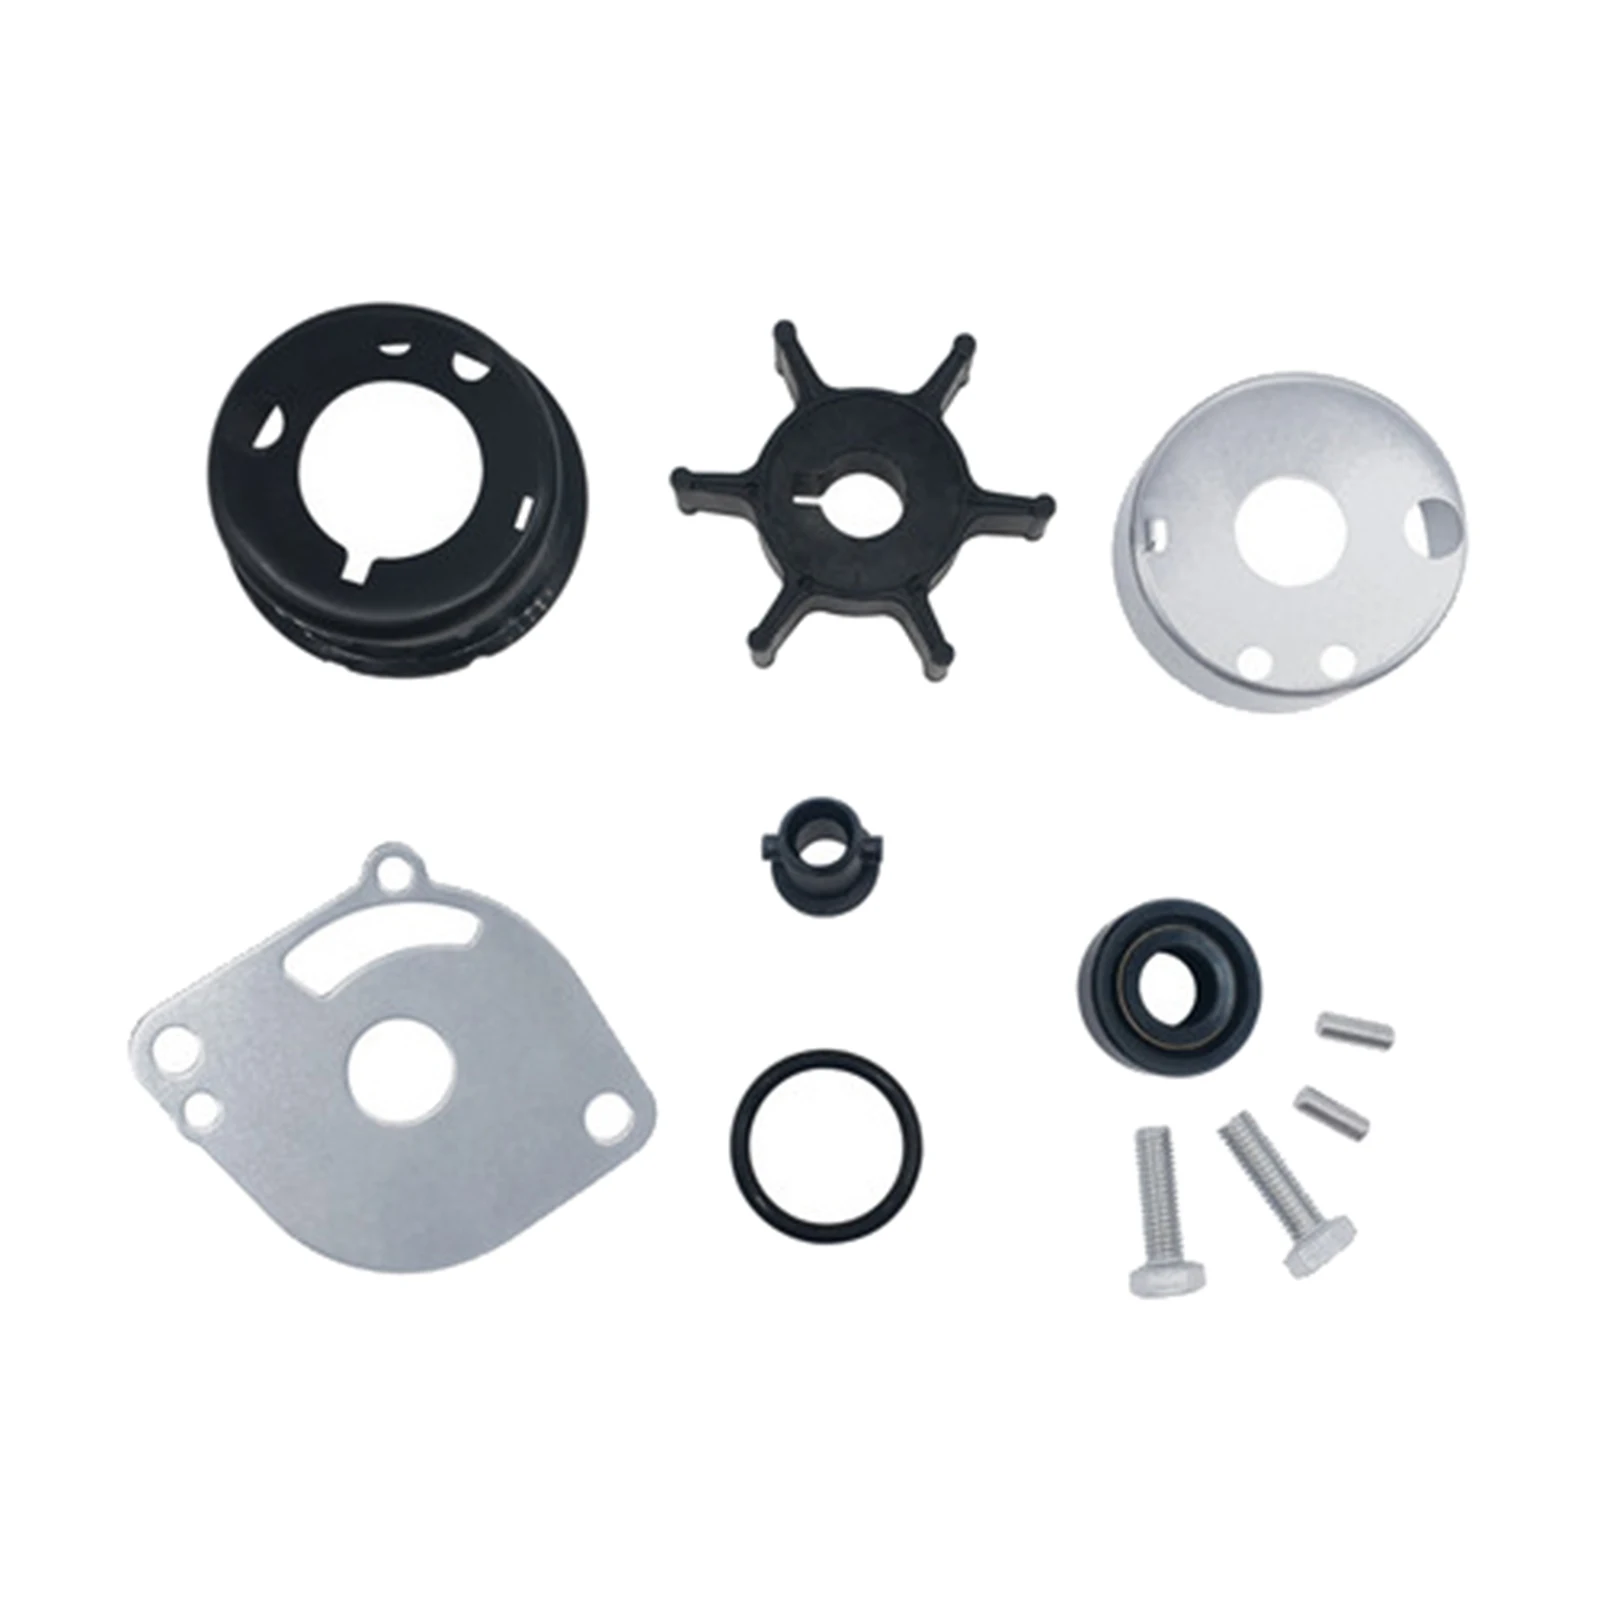 Water Pump Impeller Kit for YAMAHA 2HP 2 STROKE 1988-2009 6A1-W0078-02-00